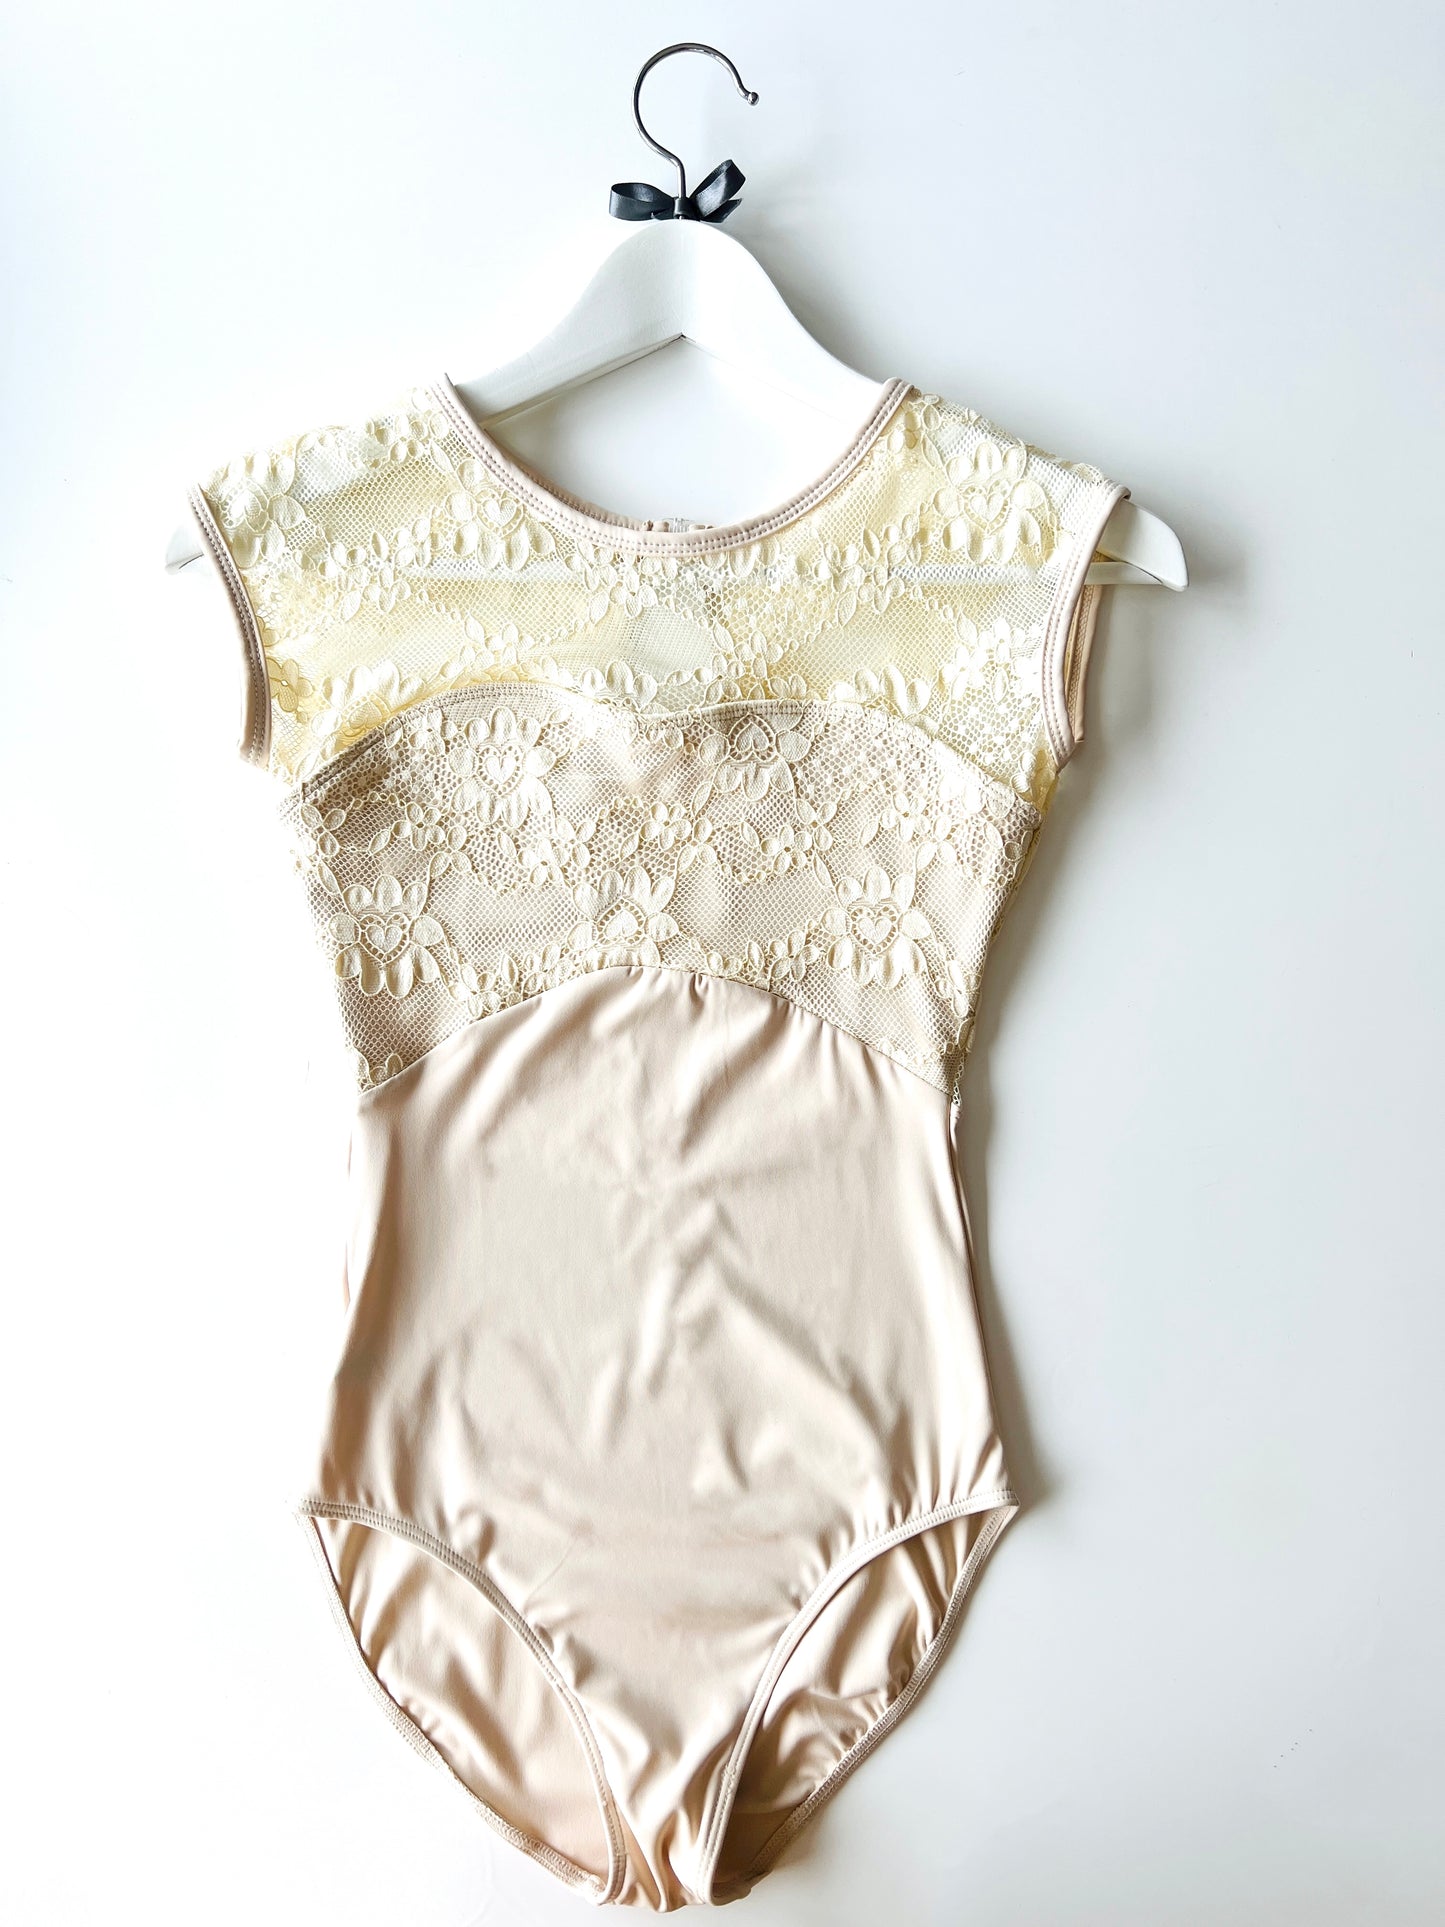 Lace cap sleeve leotard in antique cream from the collective Dancewear